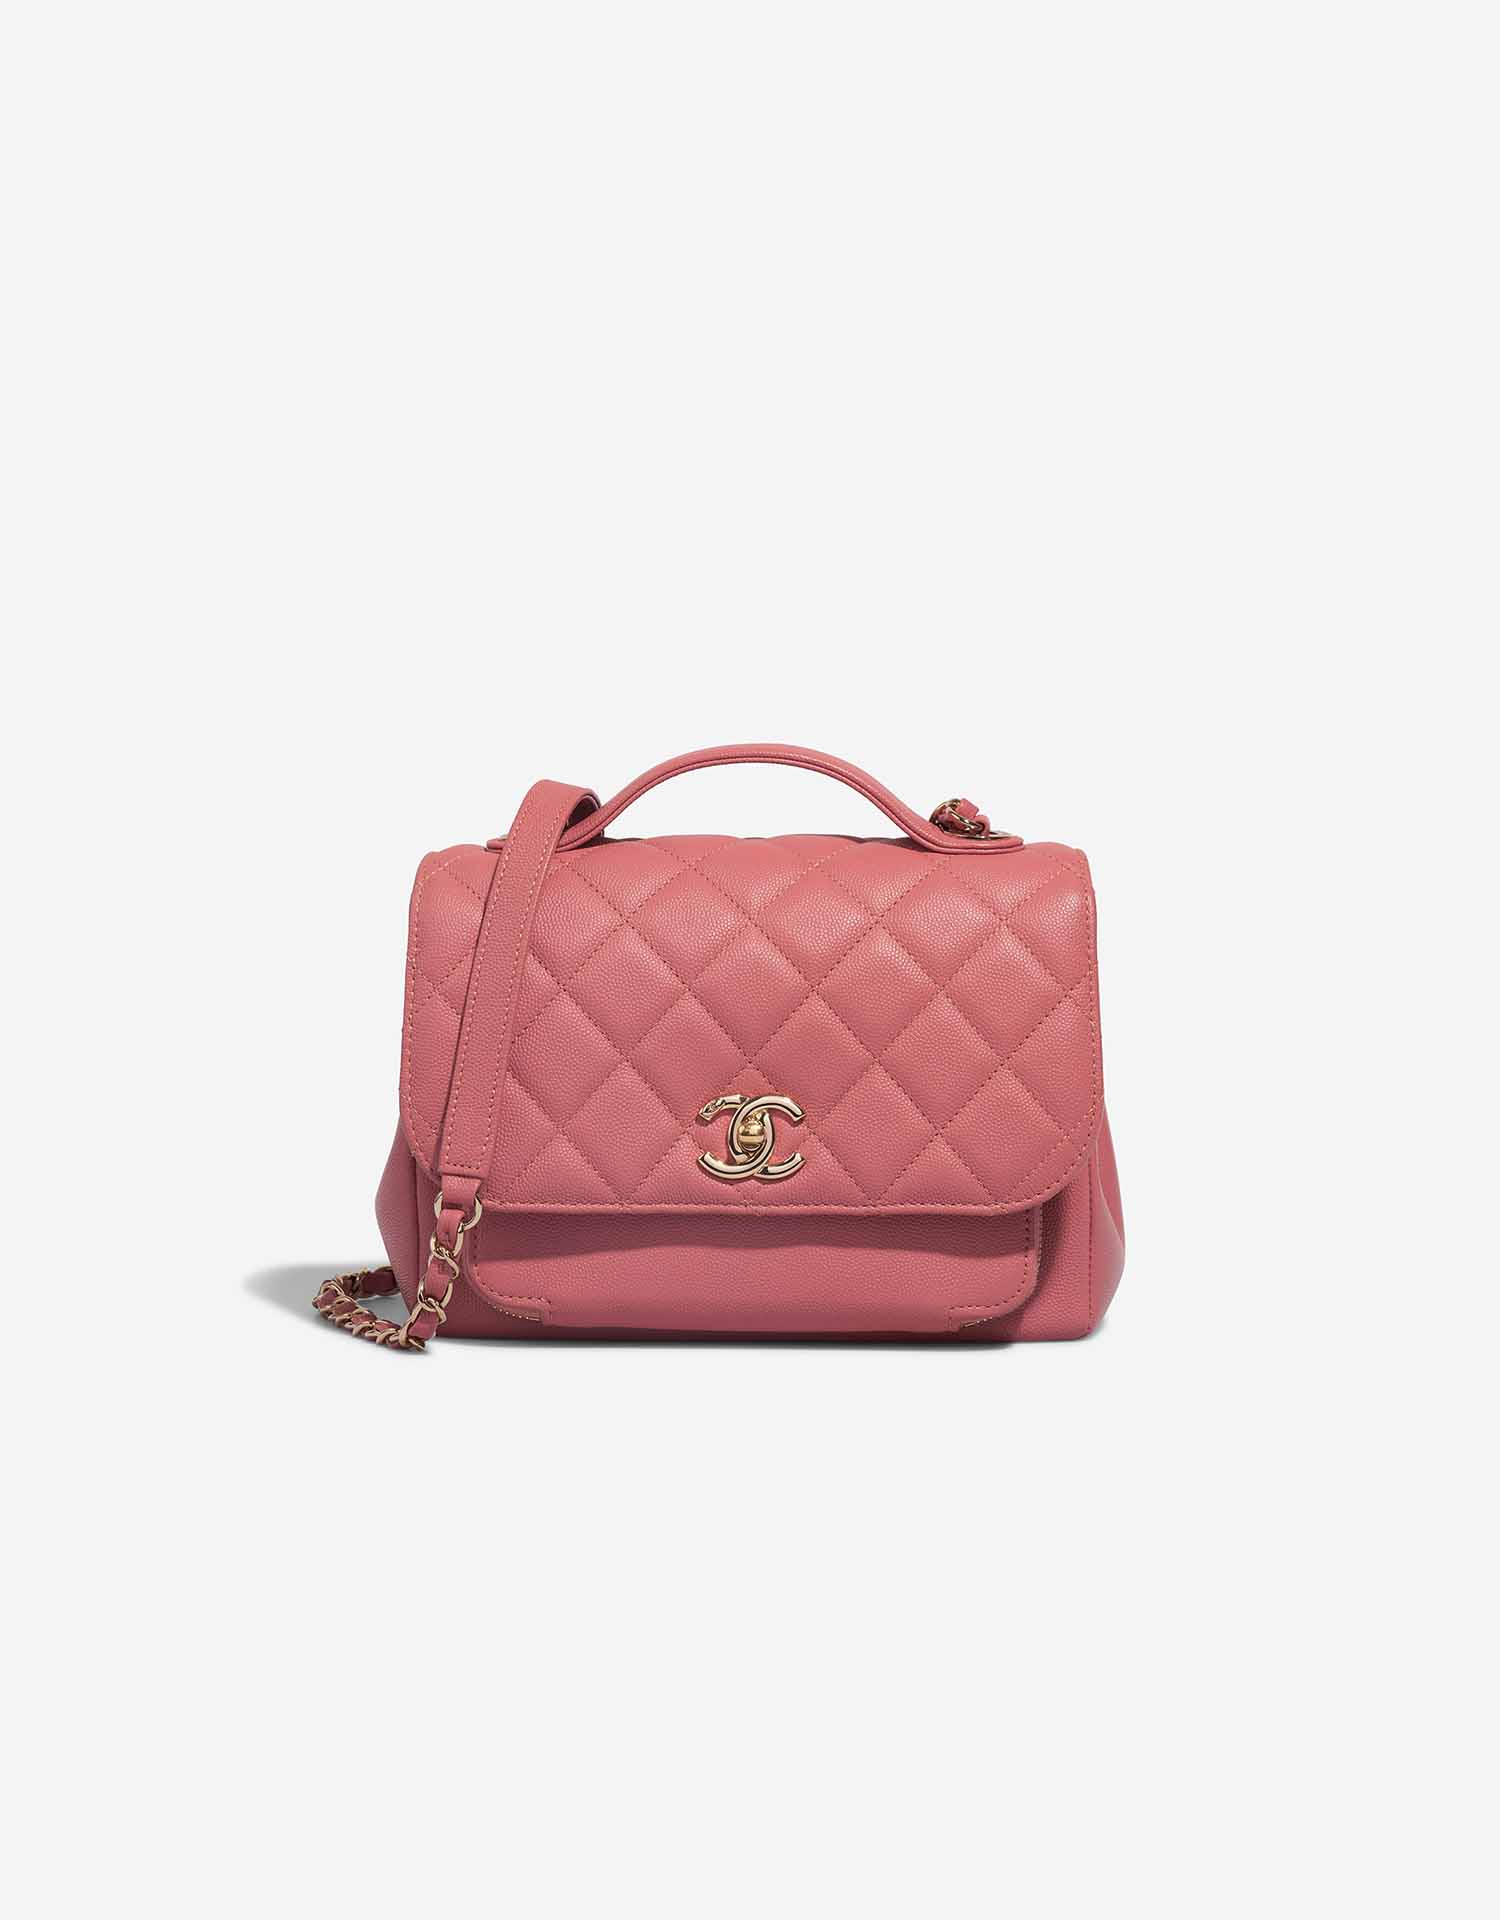 Chanel Business Affinity Medium Caviar Coral Pink